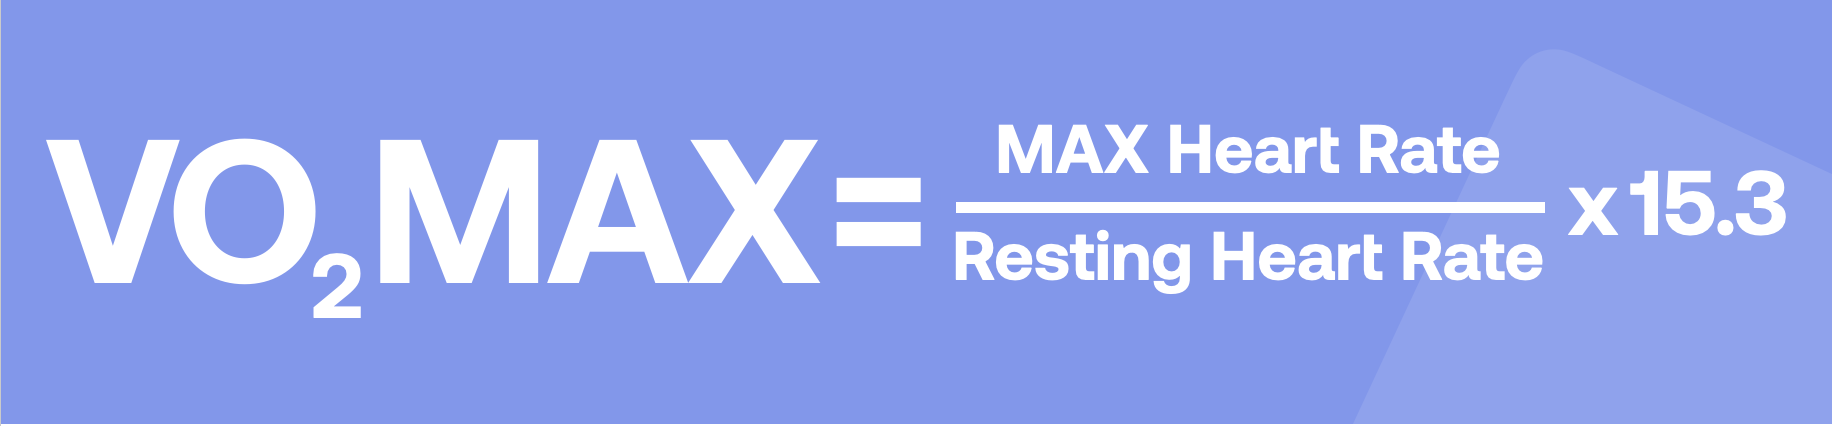 VO₂ MAX = MAX Heart Rate/Resting Heart Rate x 15.3